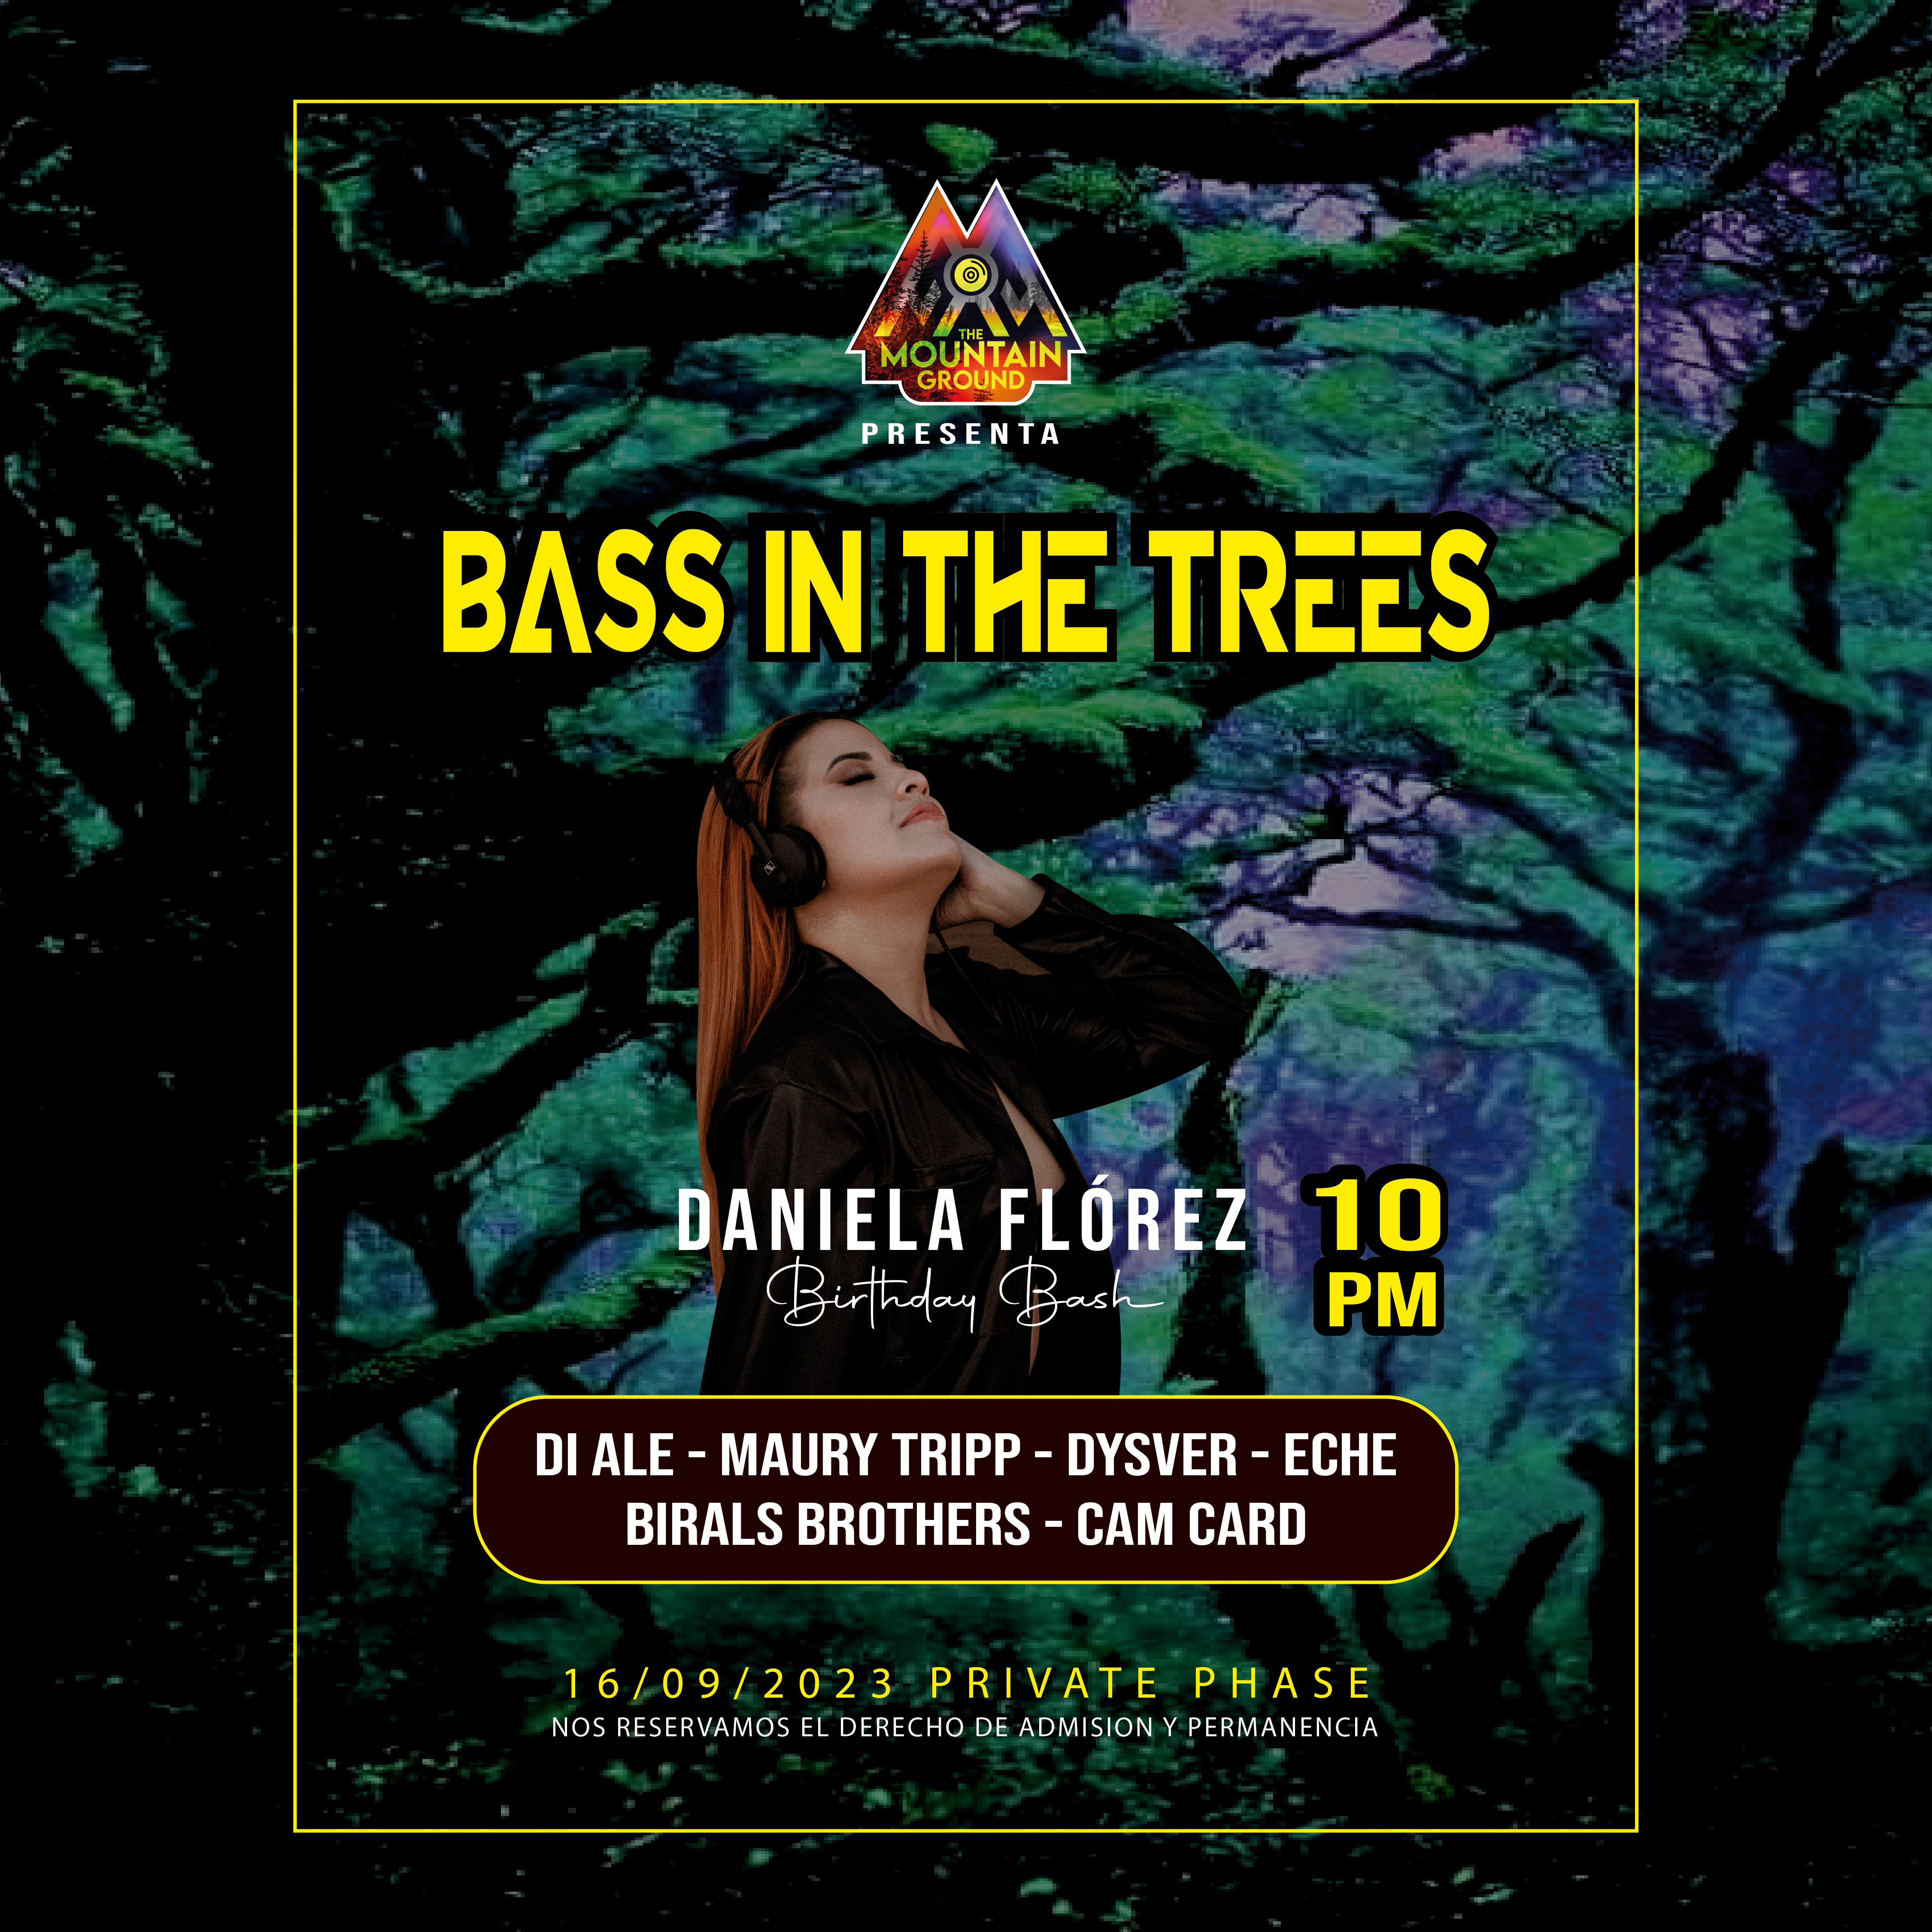 Bass in the trees - フライヤー表